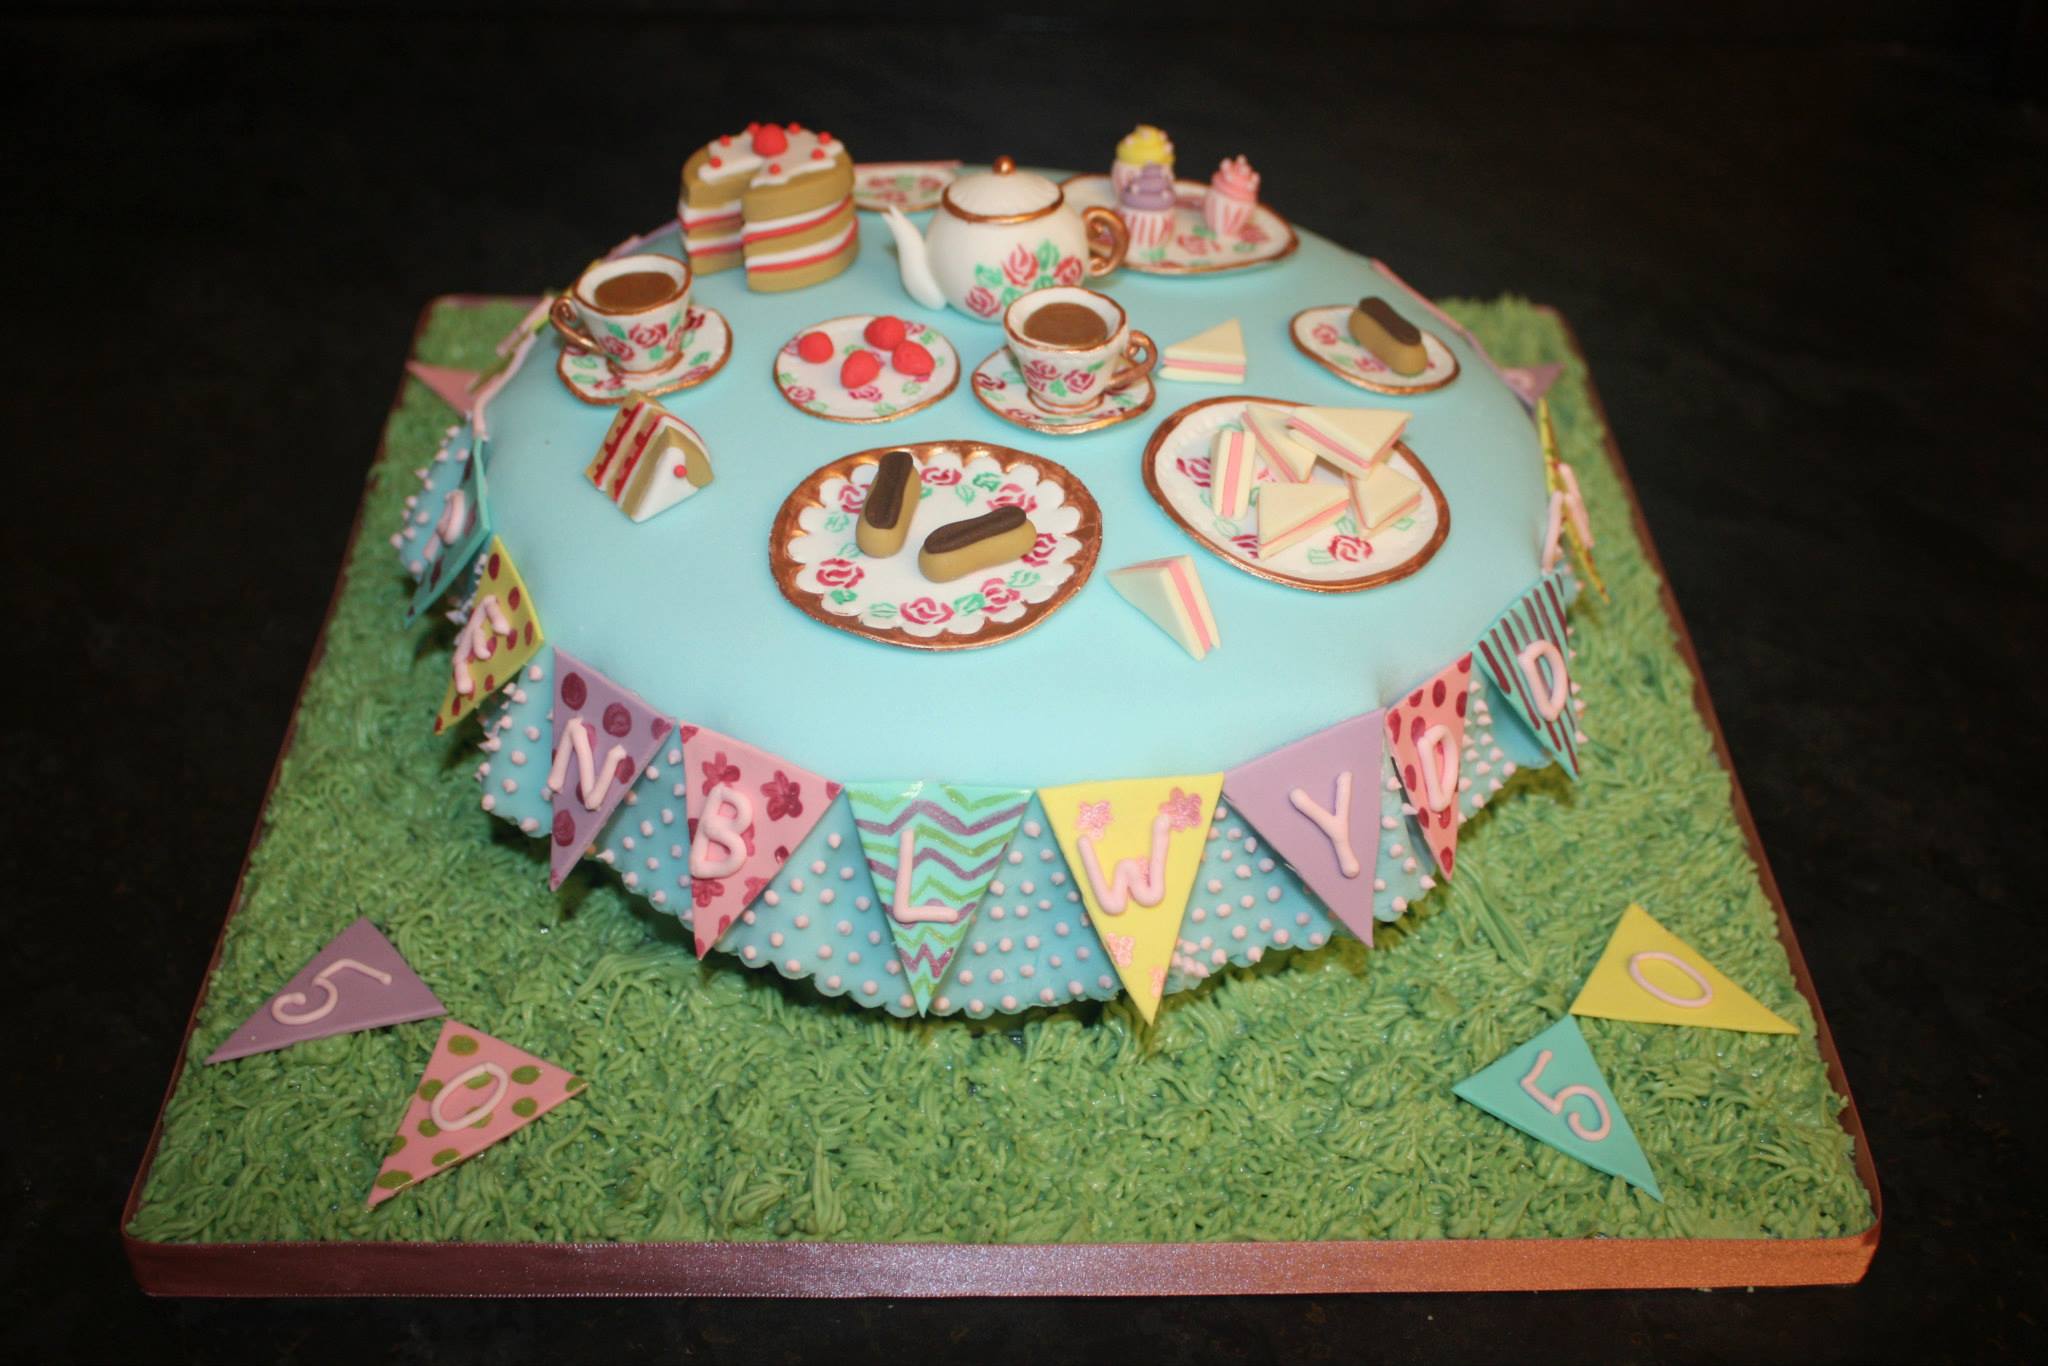 Vintage tea party cake | The Great British Bake Off